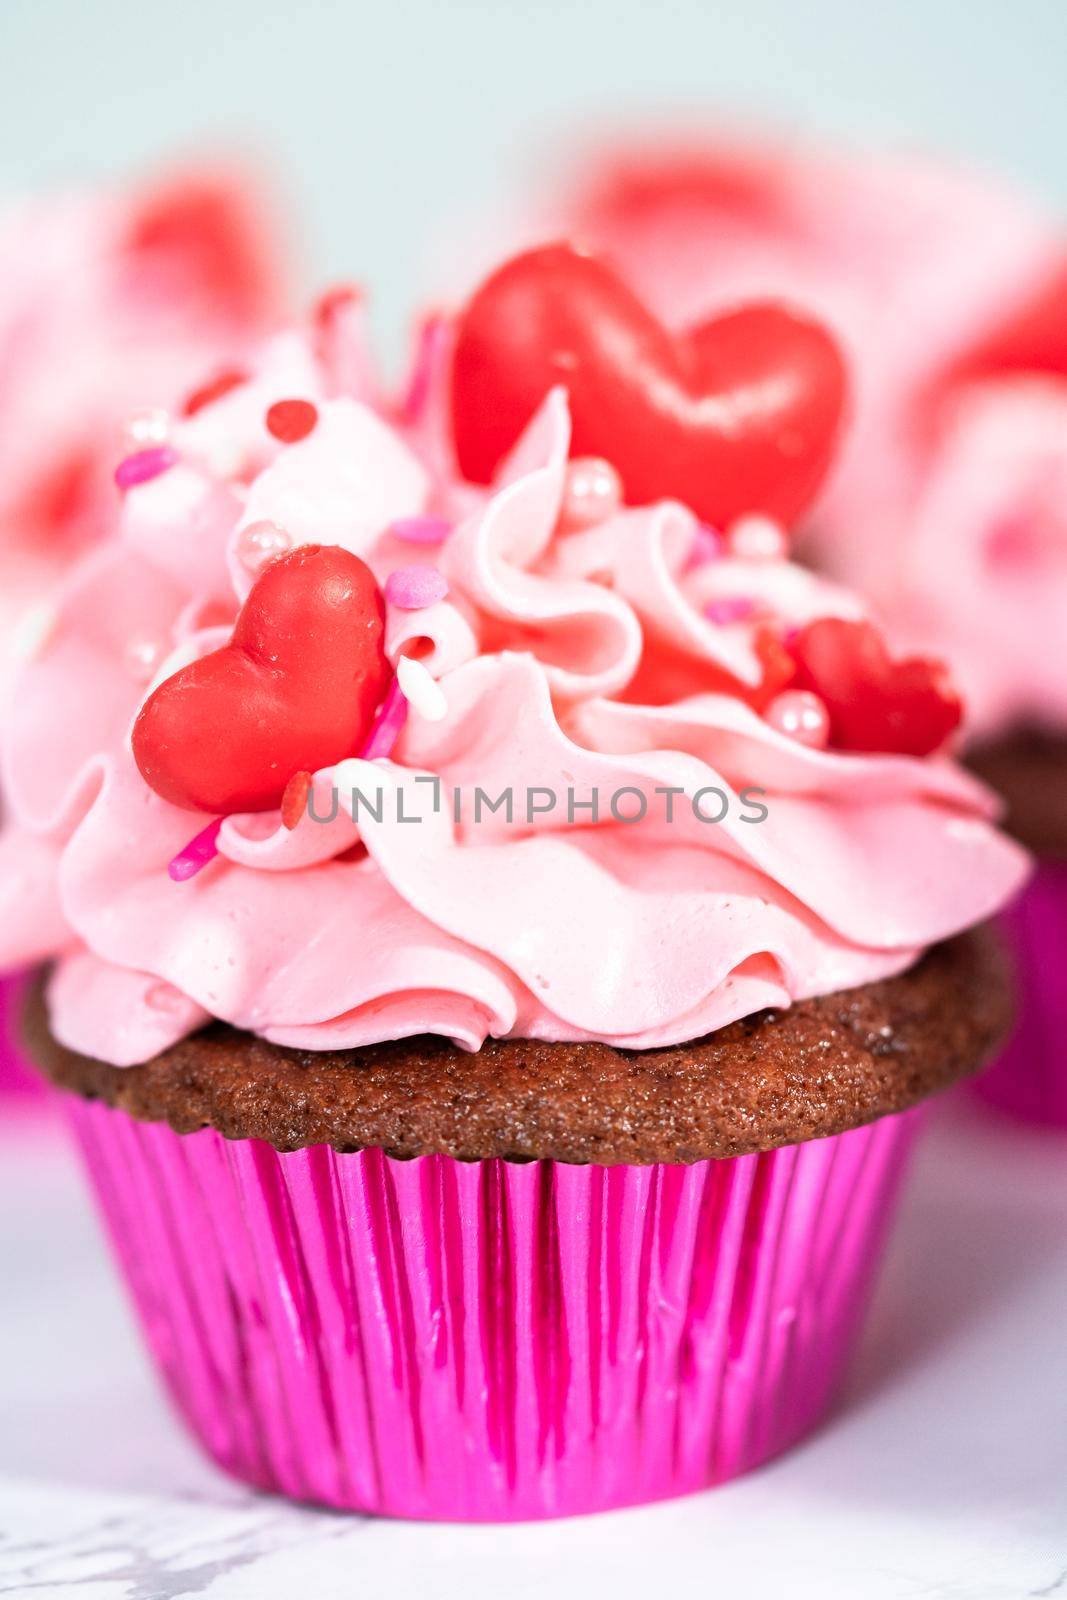 Red velvet cupcakes with pink Italian buttercream frosting and decorates with heart and kiss shaped red chocolates.